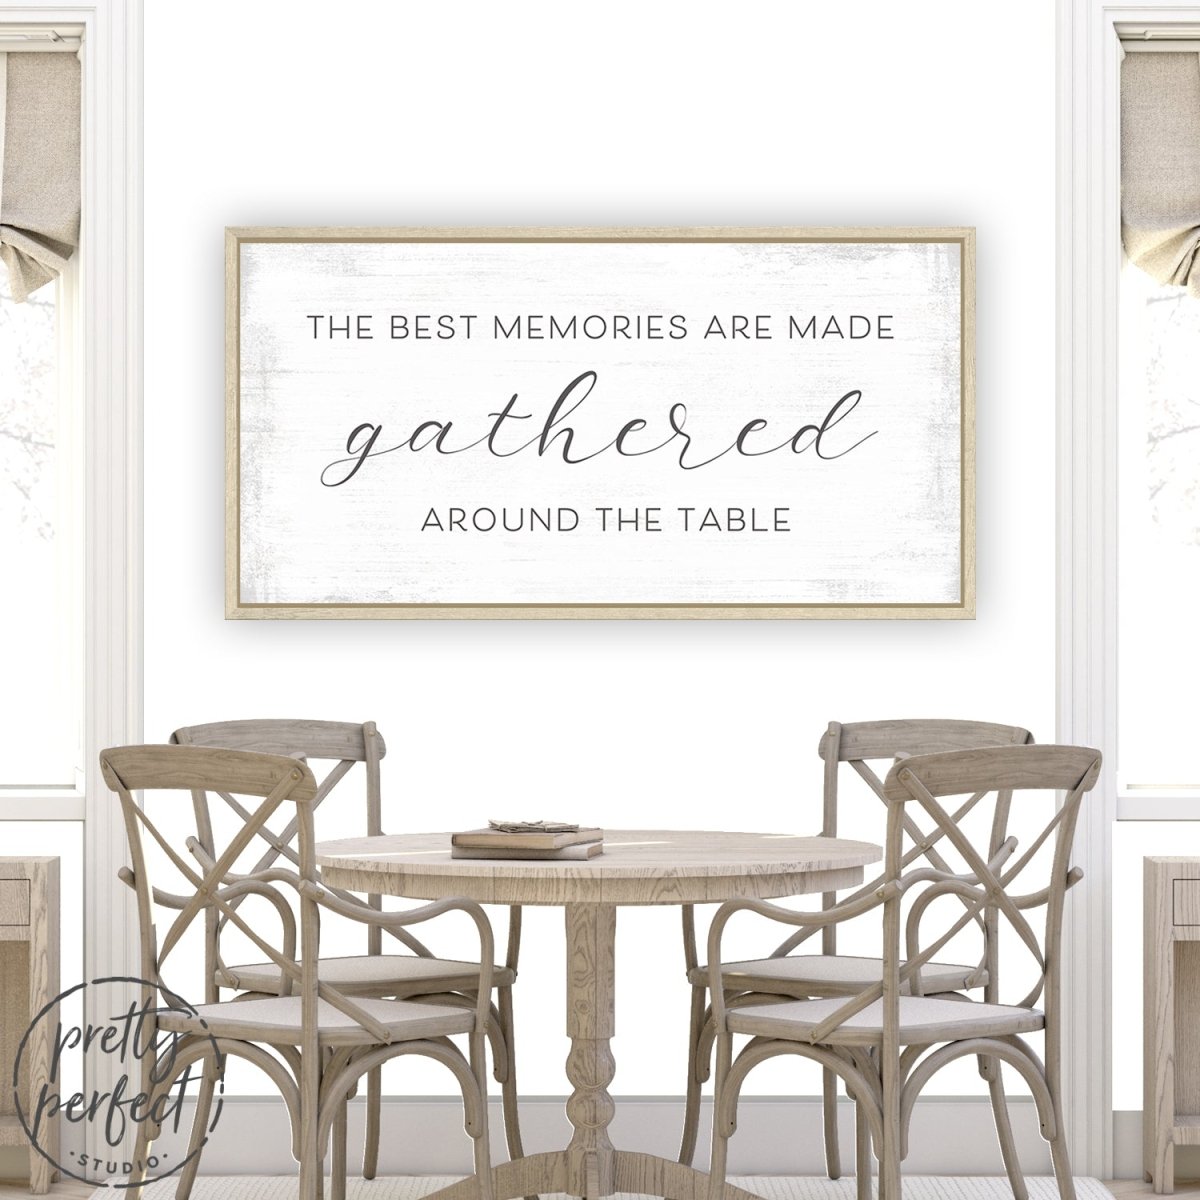 The Best Memories Are Made Gathered Around The Table Sign - Pretty Perfect Studio